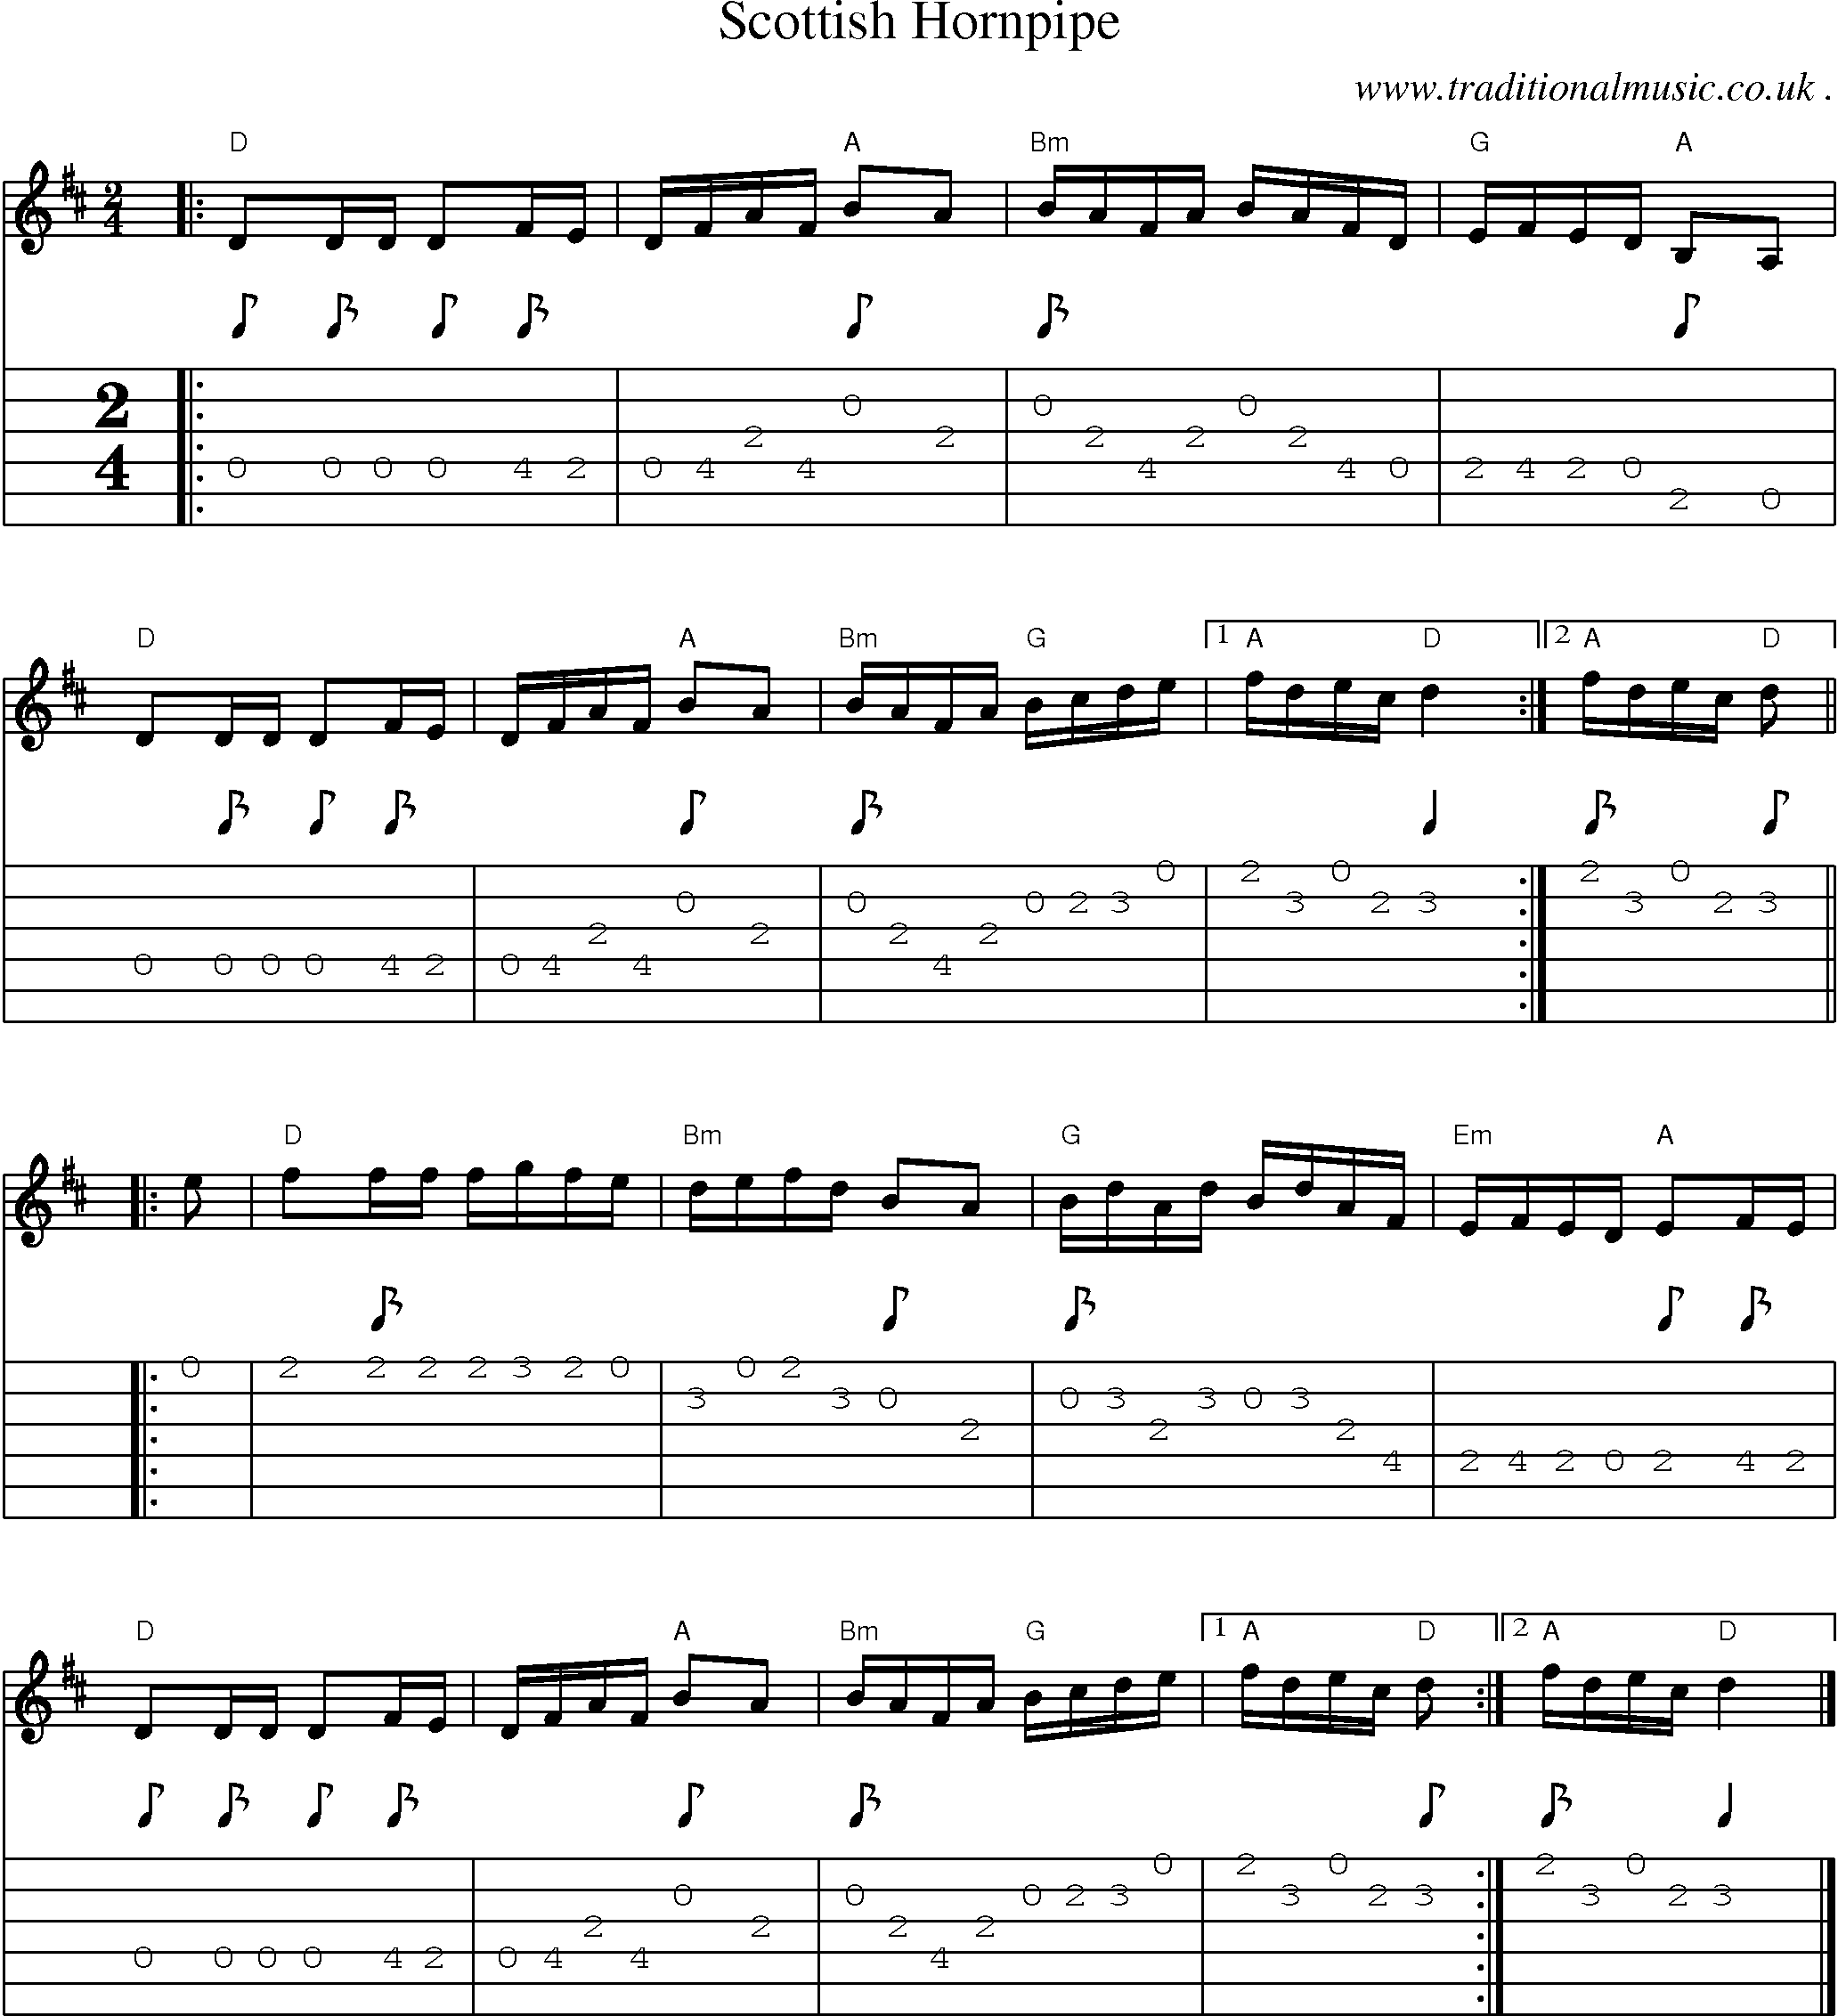 Music Score and Guitar Tabs for Scottish Hornpipe